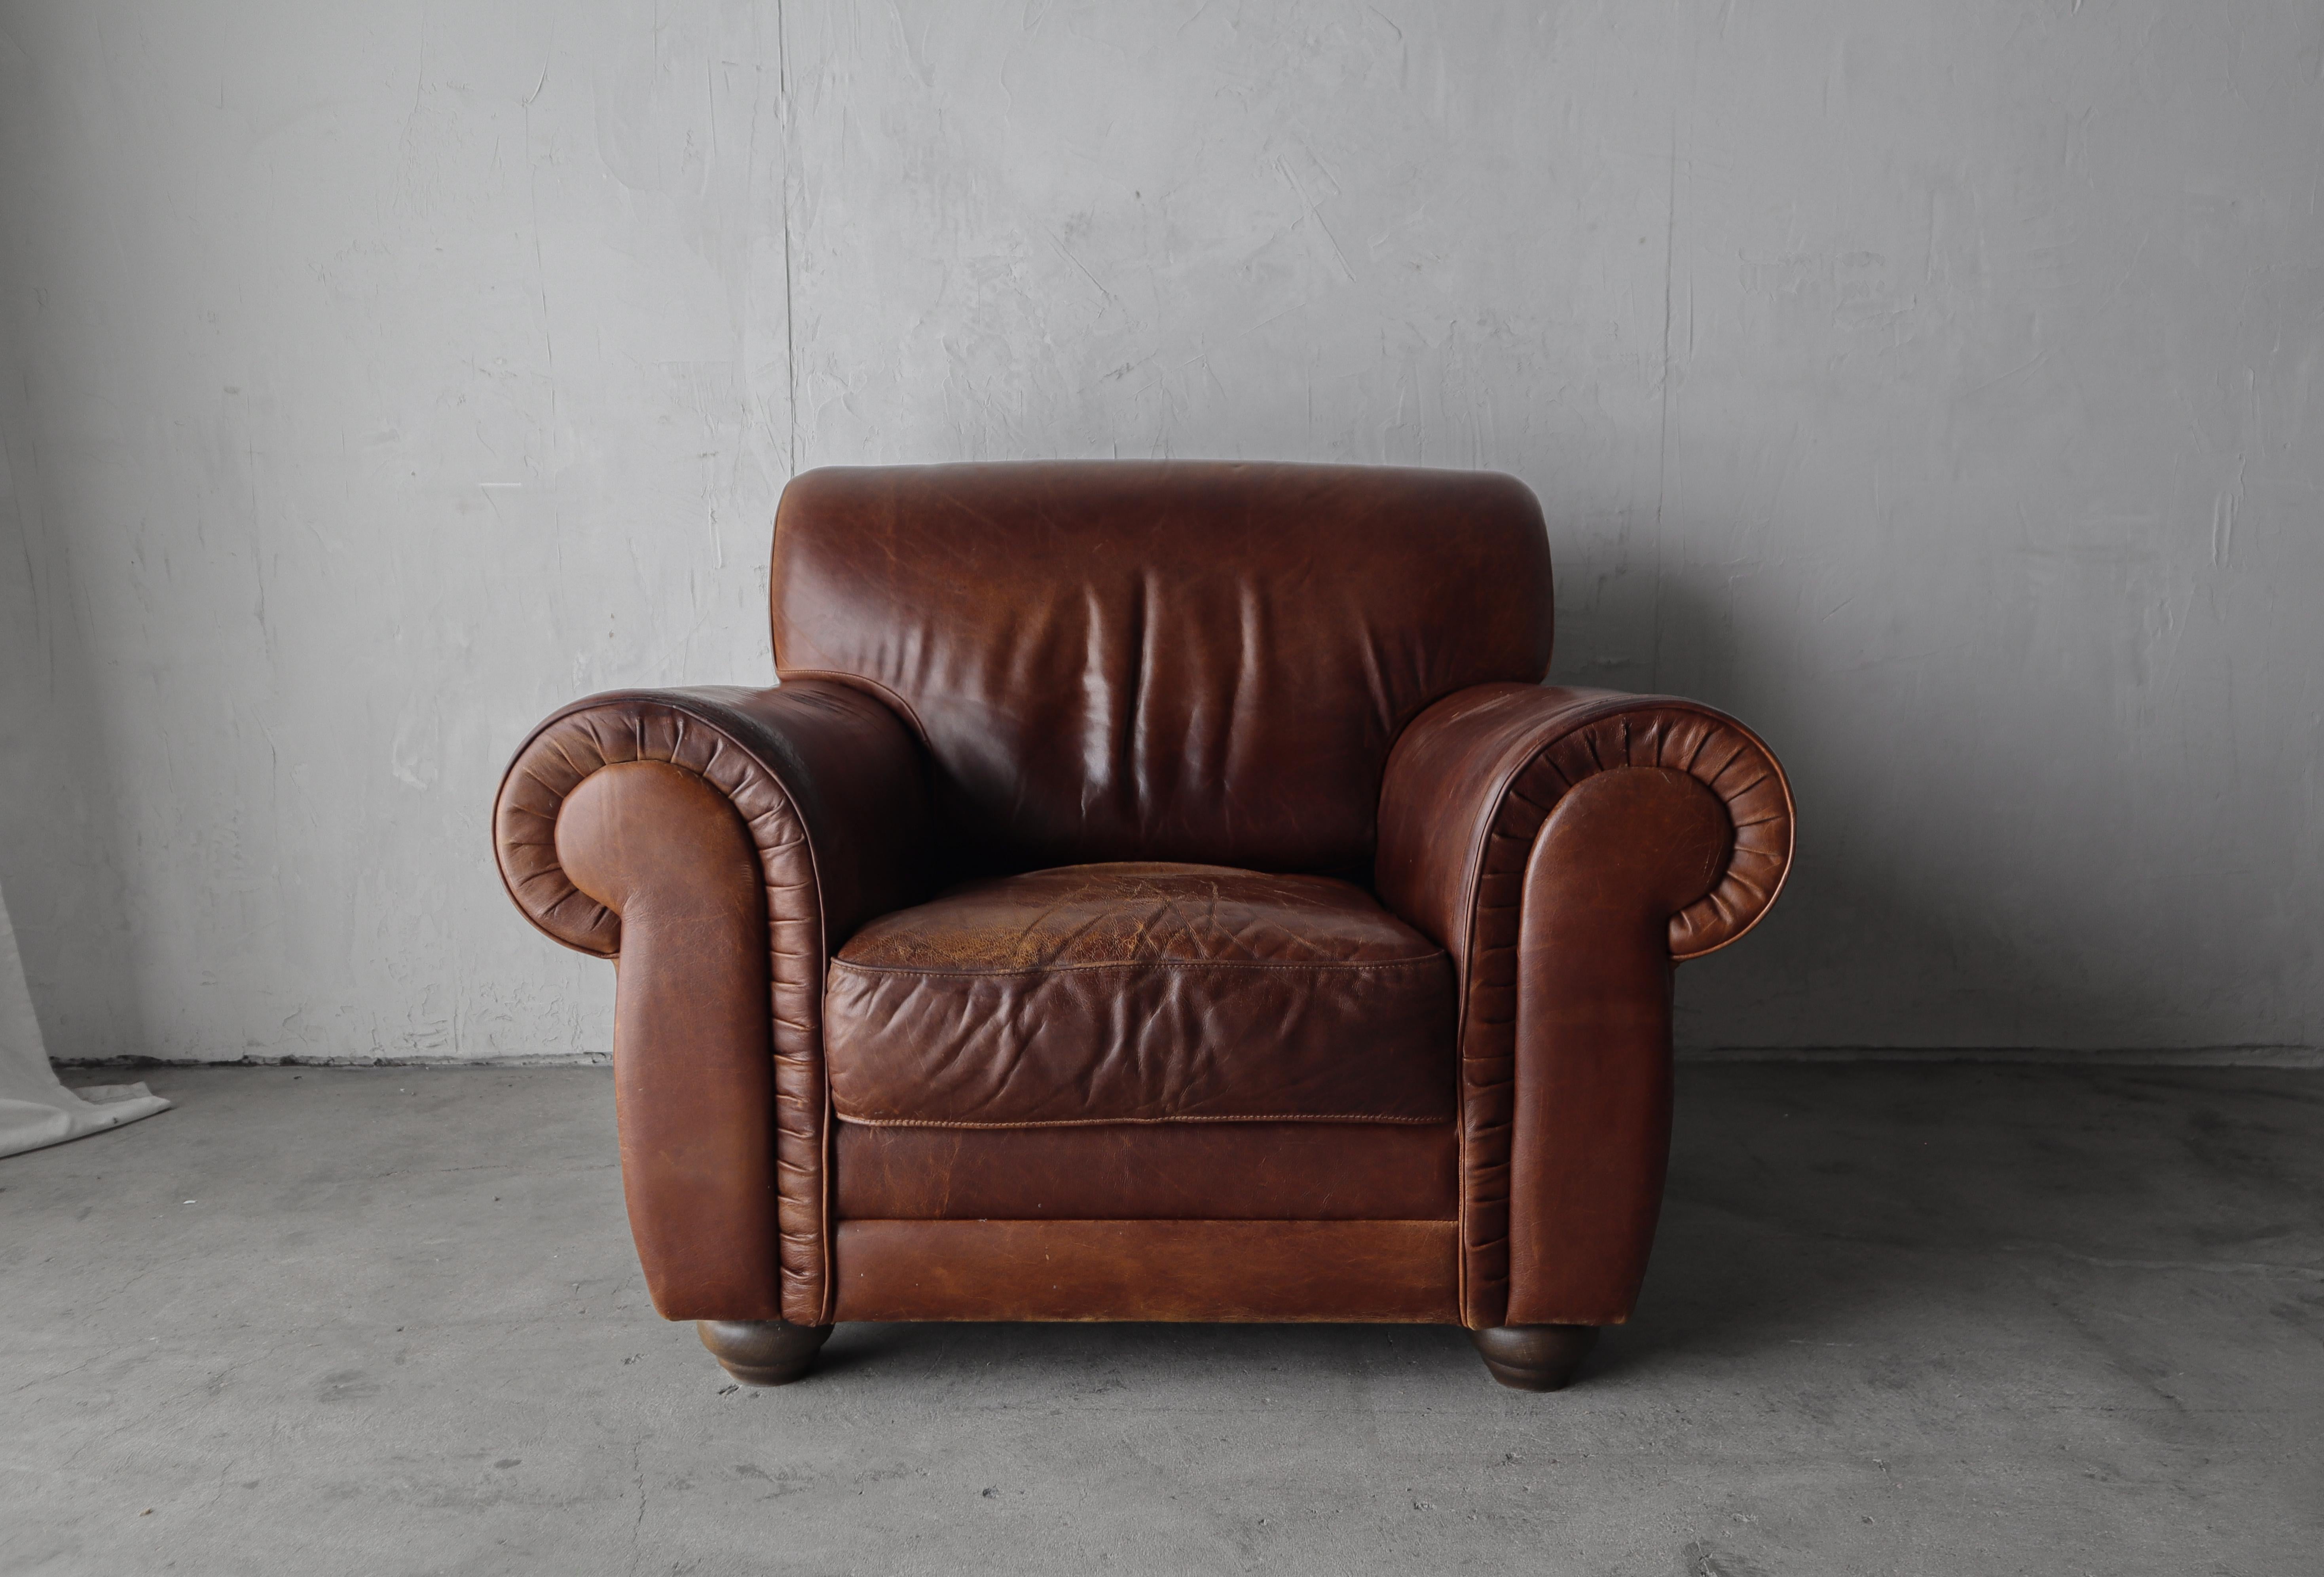 This is the ultimate vintage leather club chair and ottoman. Made in Italy, this patinated leather club chair is the epitome of perfect worn leather chairs. This combo features the kind of patina that money can't buy, the kind that only comes with